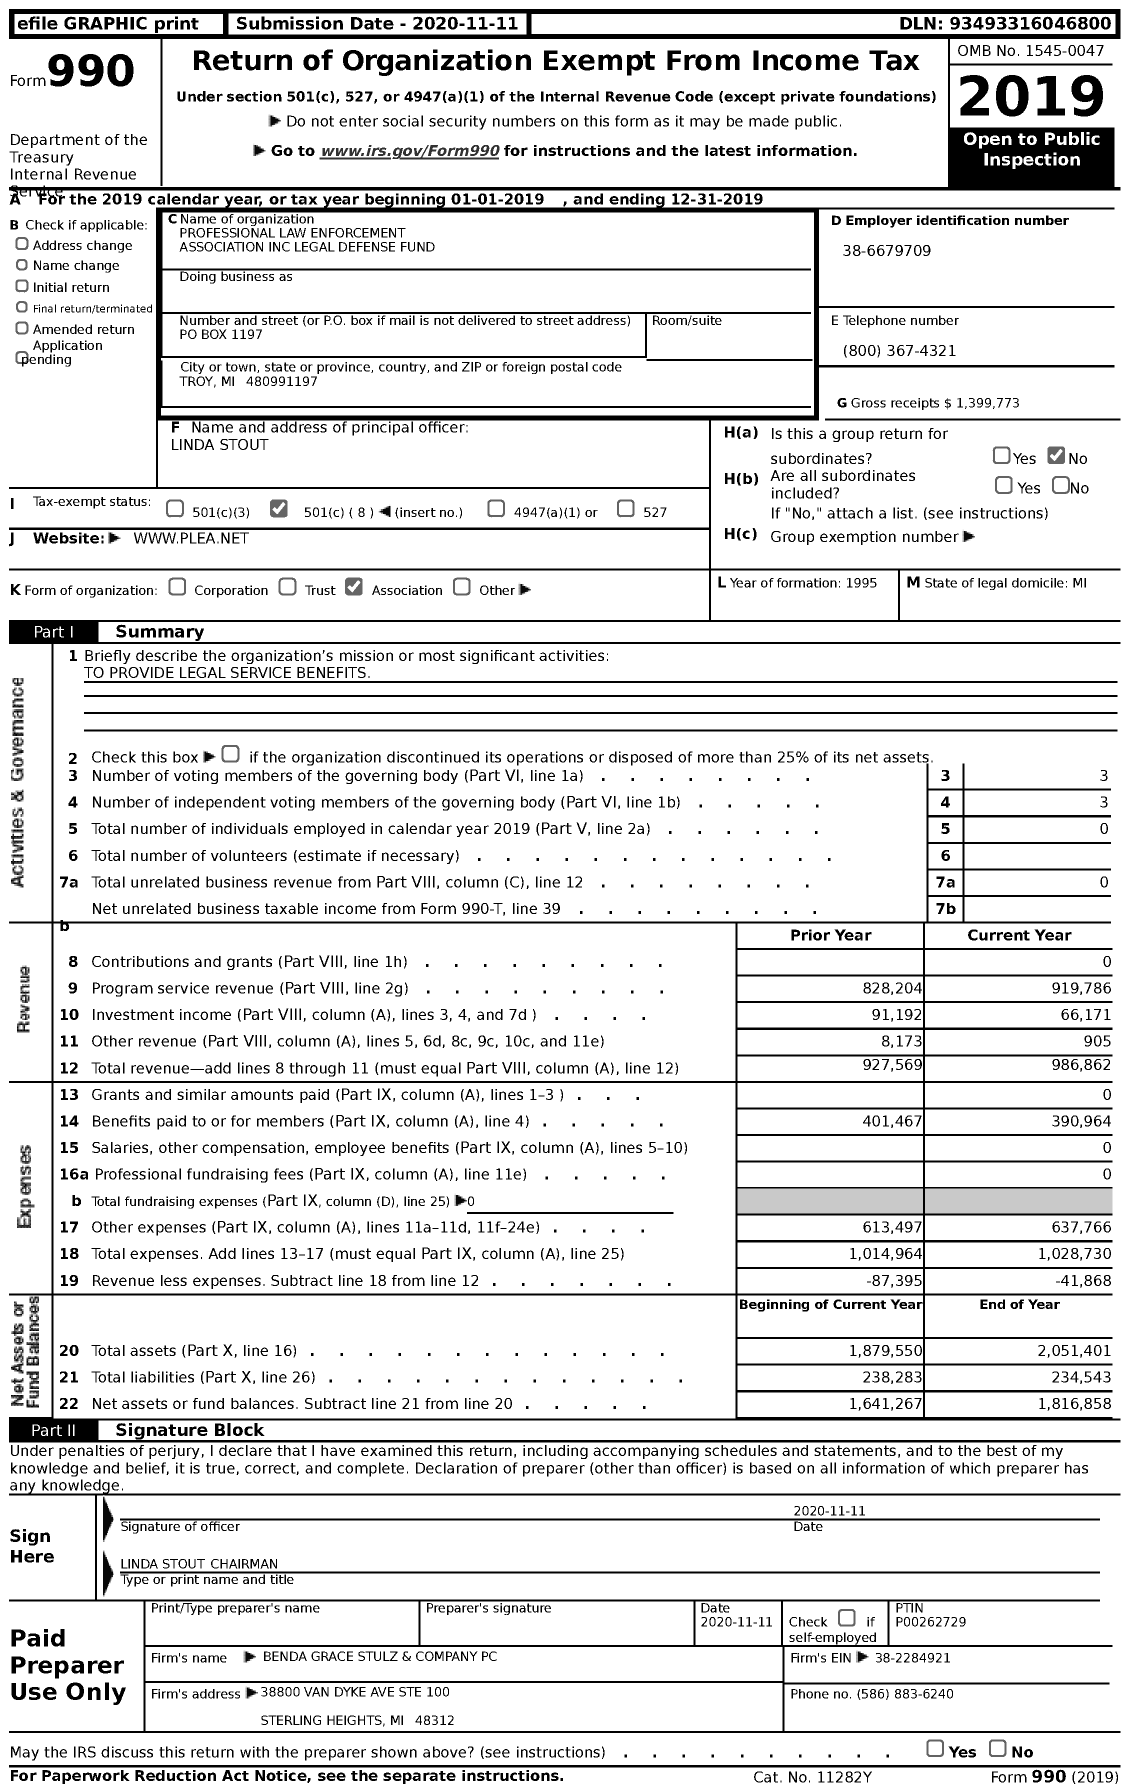 Image of first page of 2019 Form 990 for Professional Law Enforcement Association Legal Defense Fund